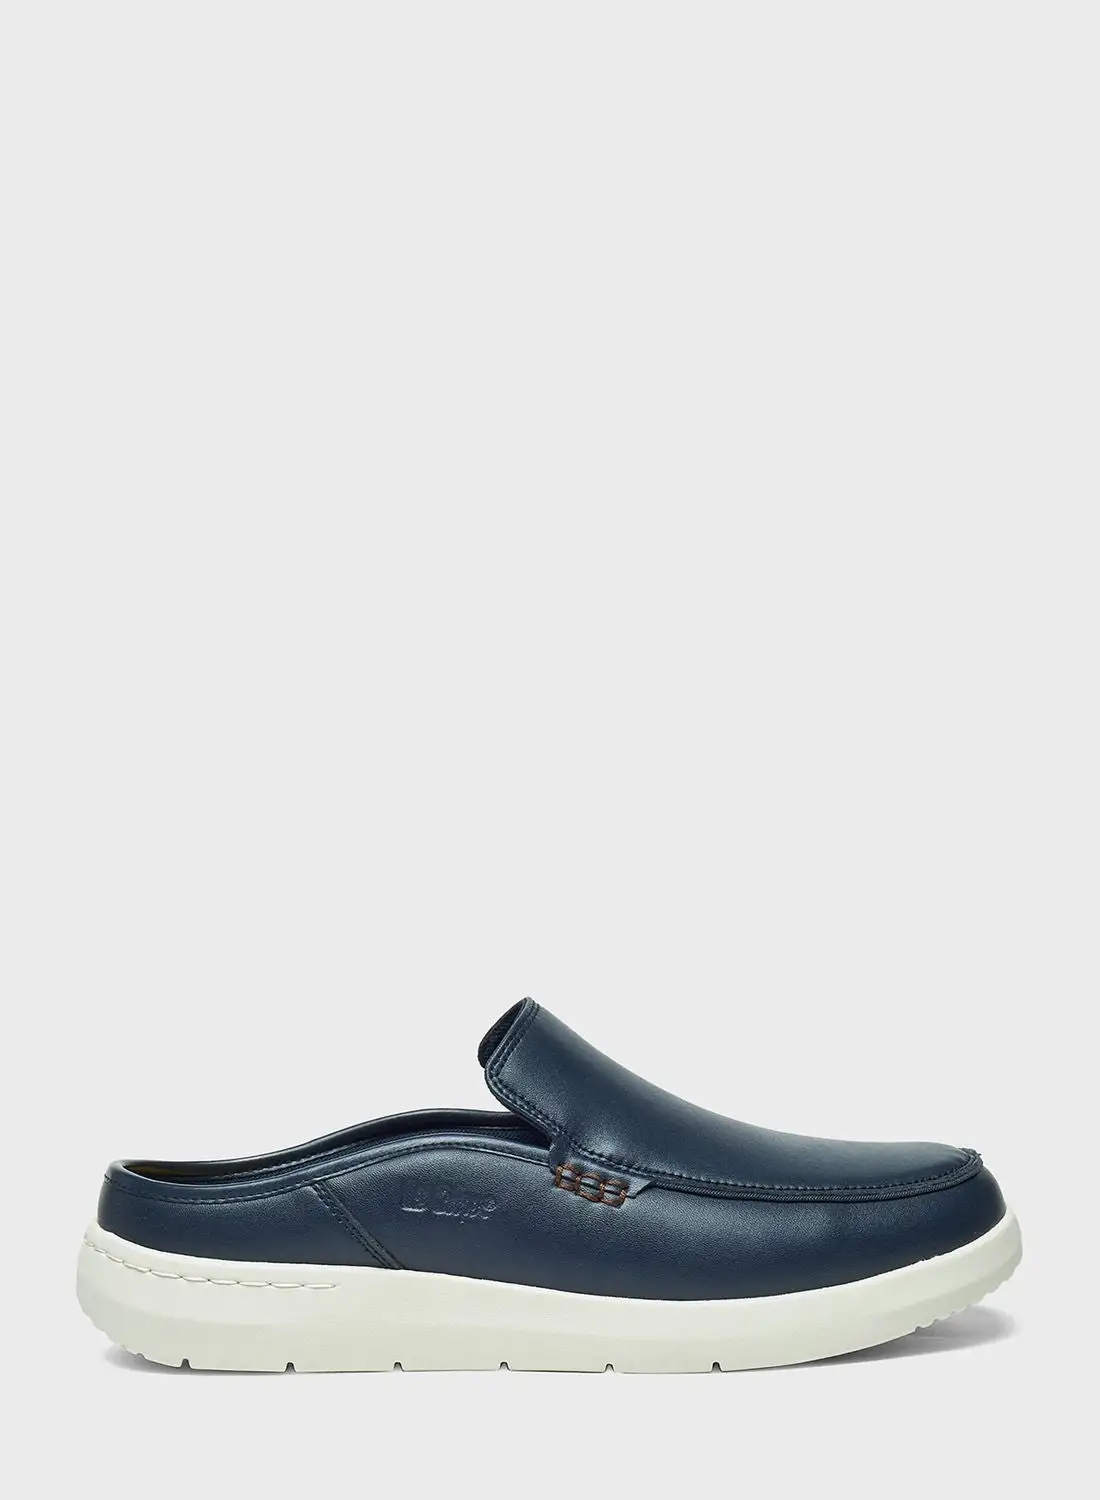 Lee Cooper Casual Slip On Loafers